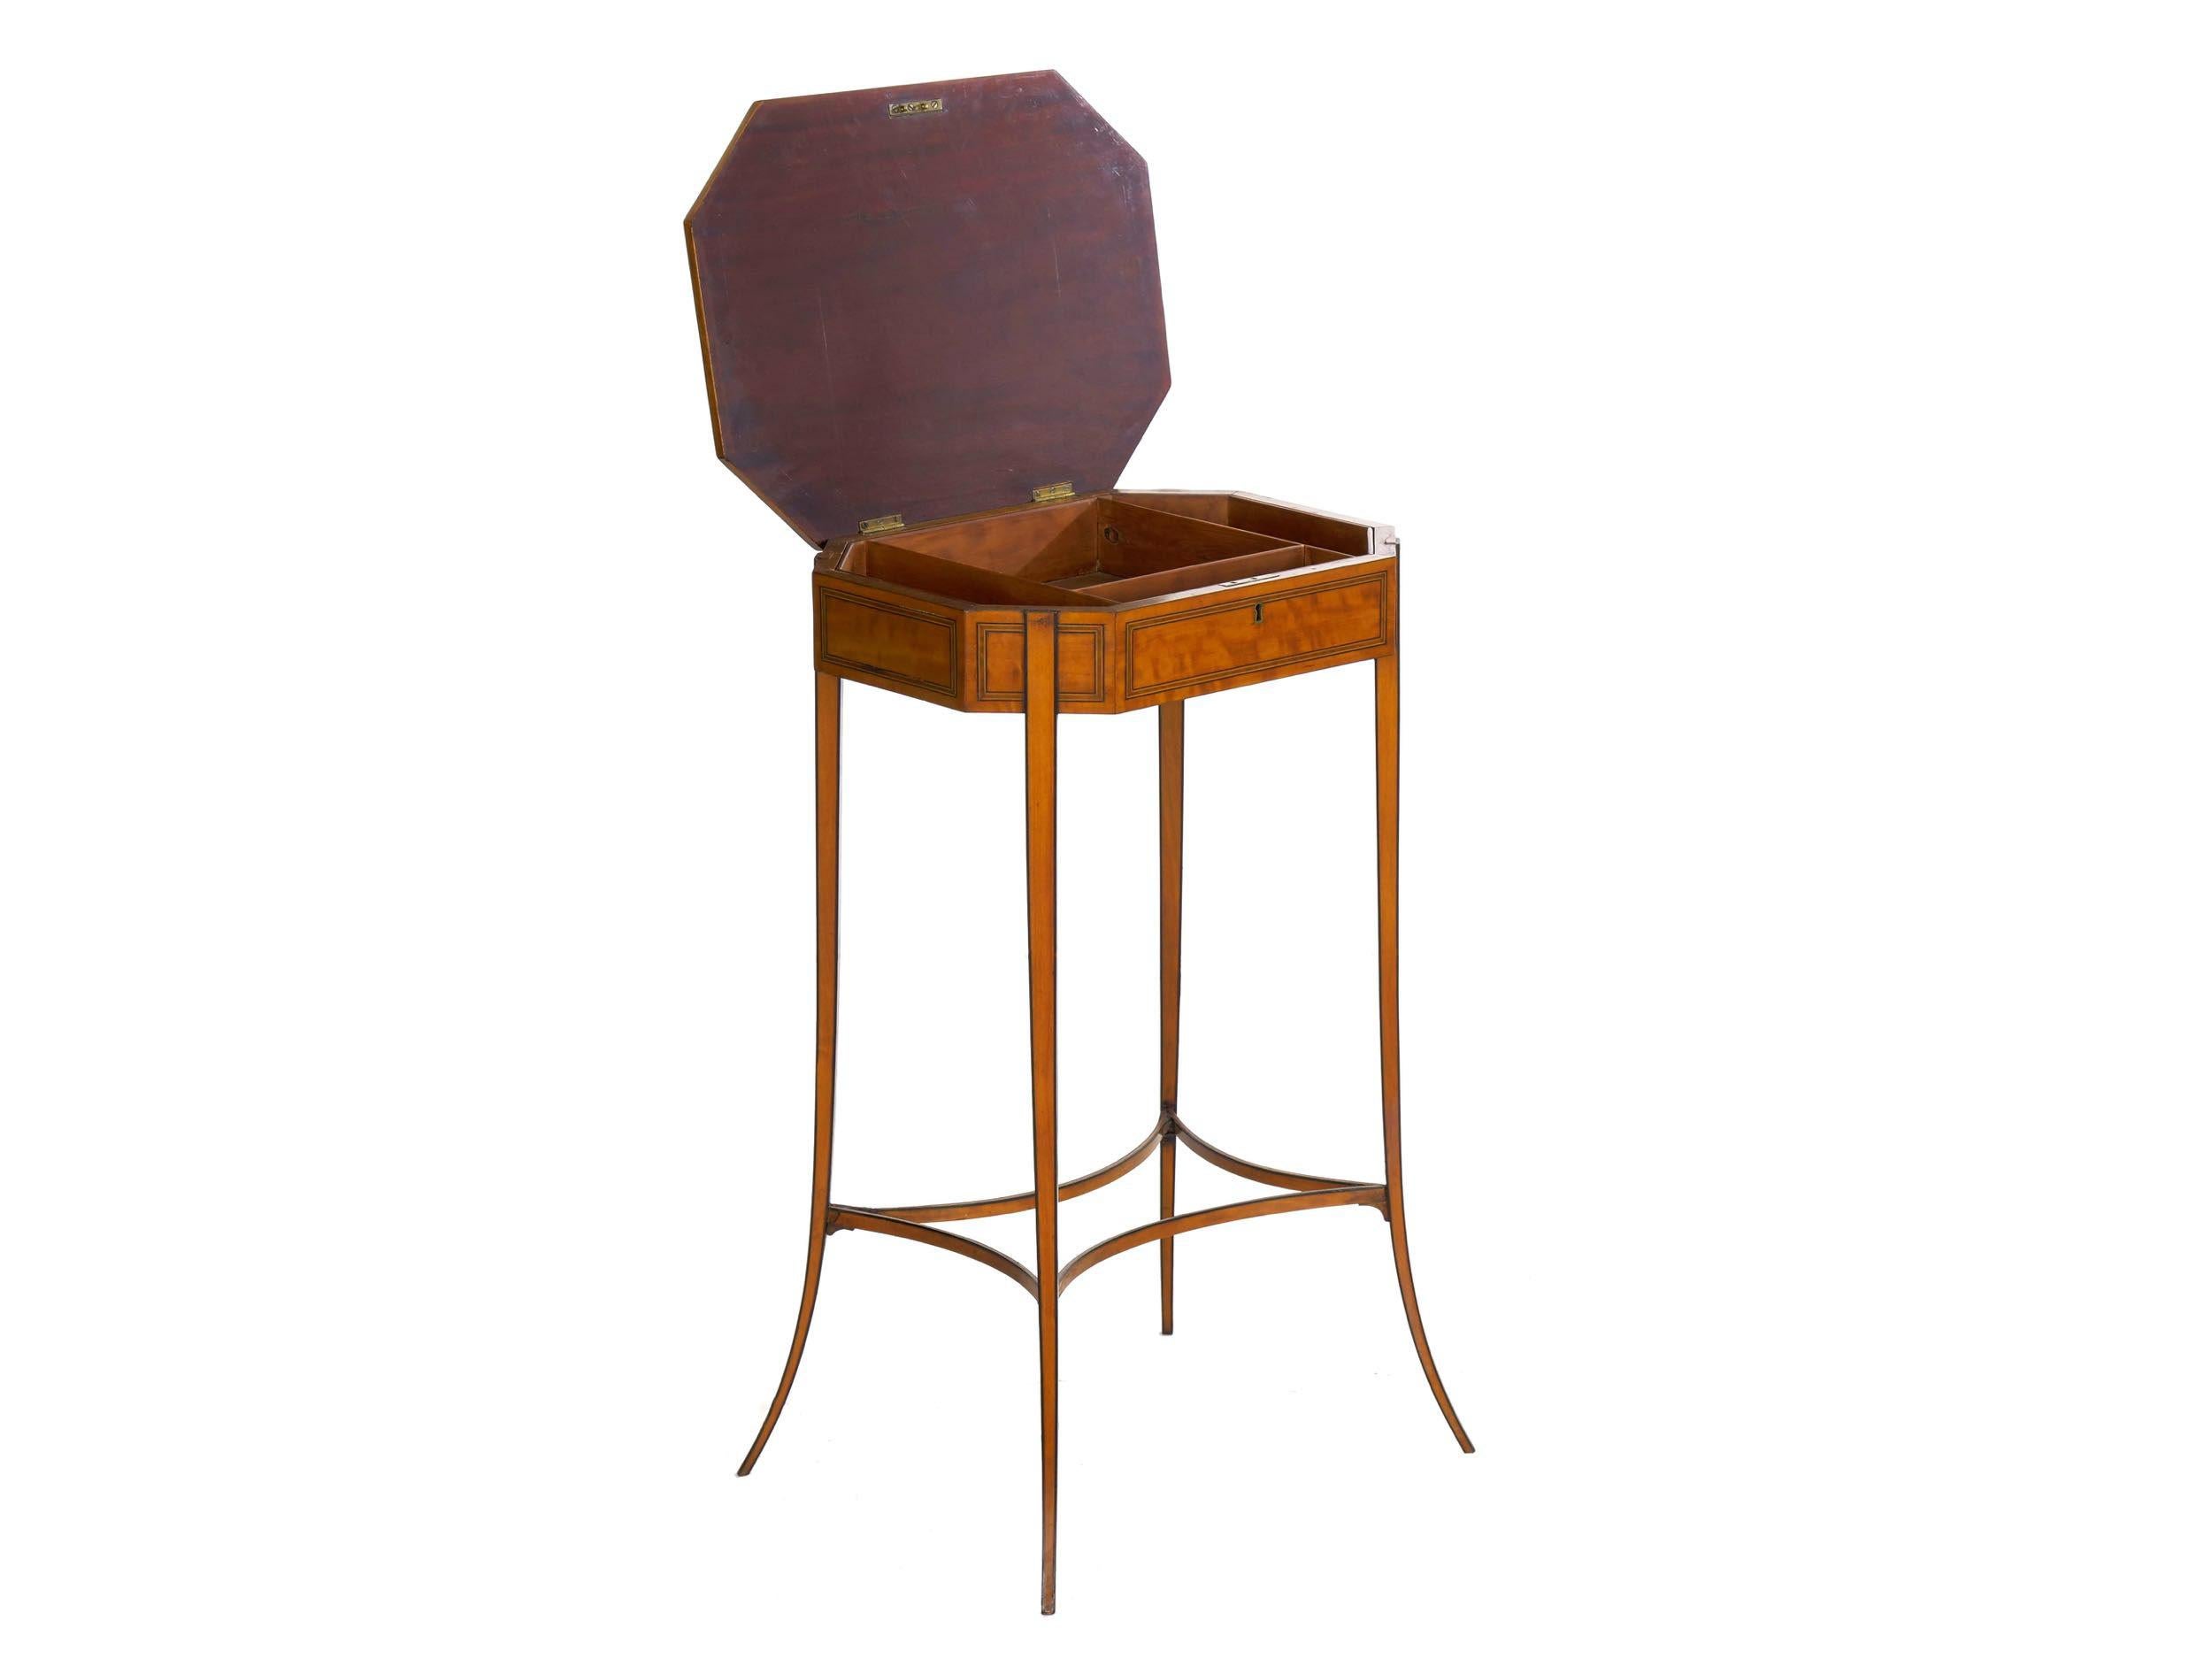 English Regency Satinwood Octagonal Antique Accent Table, England, circa 1800